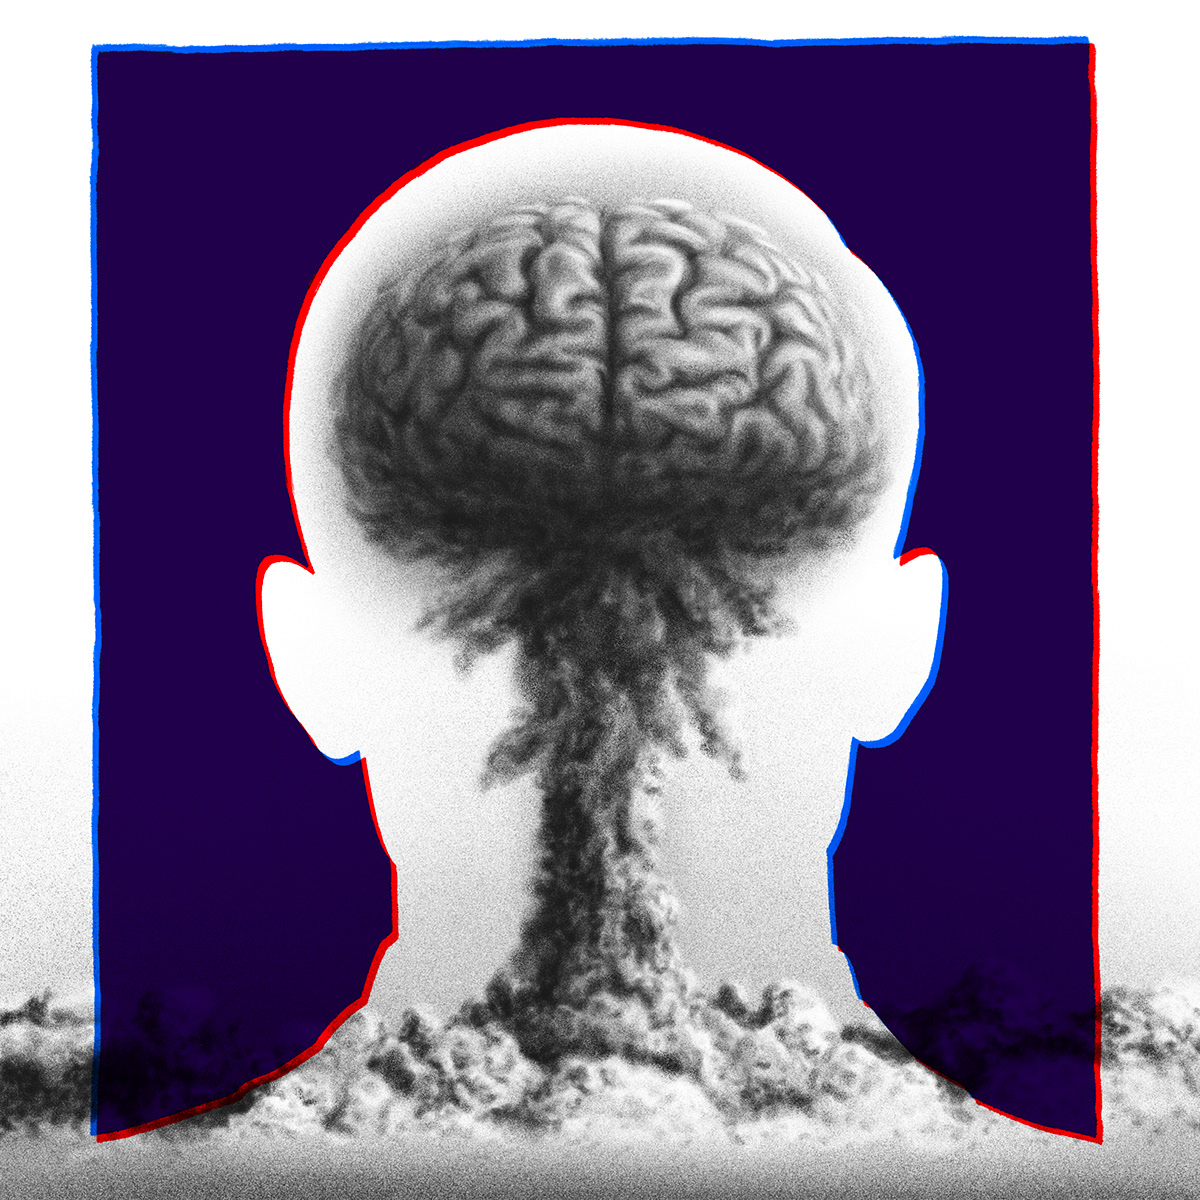 Neuroscience doomsday NYTimes science atomic brain Atomic bomb nuclear war NYTimes Illustration science times